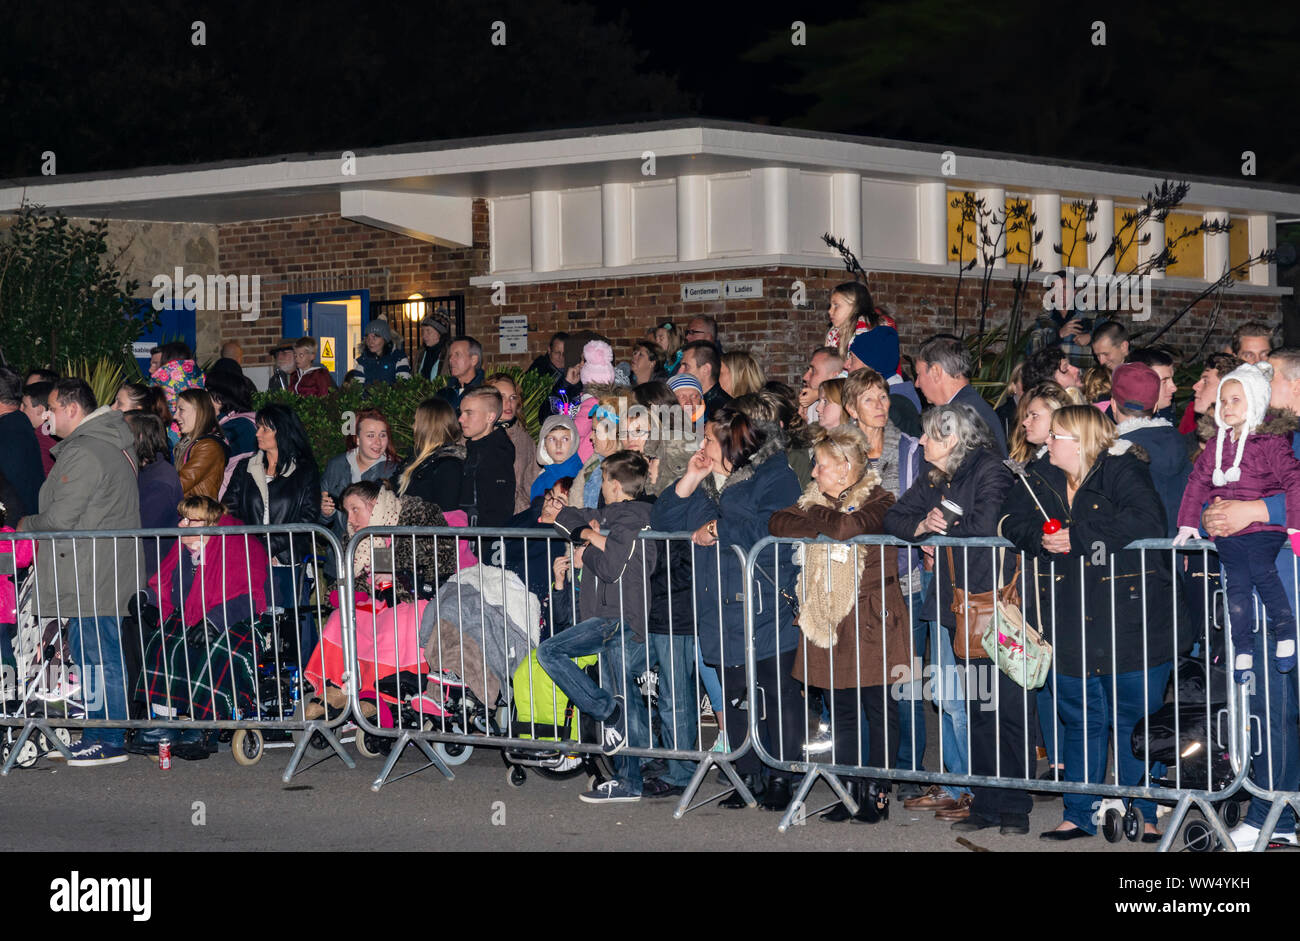 Crowd of people standing waiting behind barriers watching a procession while at a Guy Fawkes event in England, UK. Stock Photo